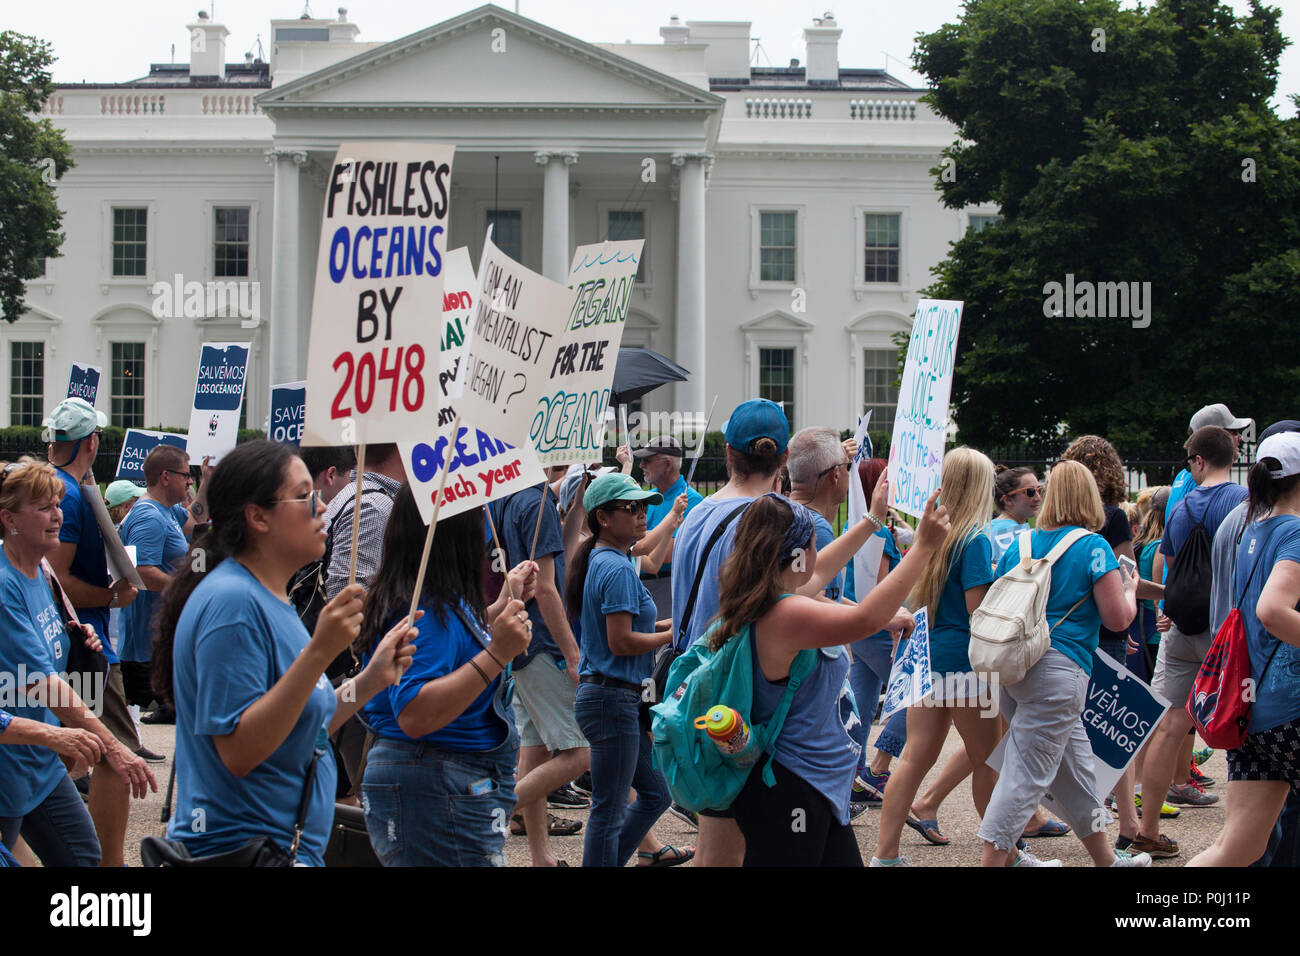 Washington DC, USA. 9th June 2018. Protestors carry signs past the White House on Pennsylvania Avenue on the March For The Ocean in Washington, D.C., June 9, 2018. The inaugural March for the Ocean called attention to ocean issues including plastic pollution and overfishing at events in the U.S. Capital and around the United States. Credit: Robert Meyers/Alamy Live News Stock Photo